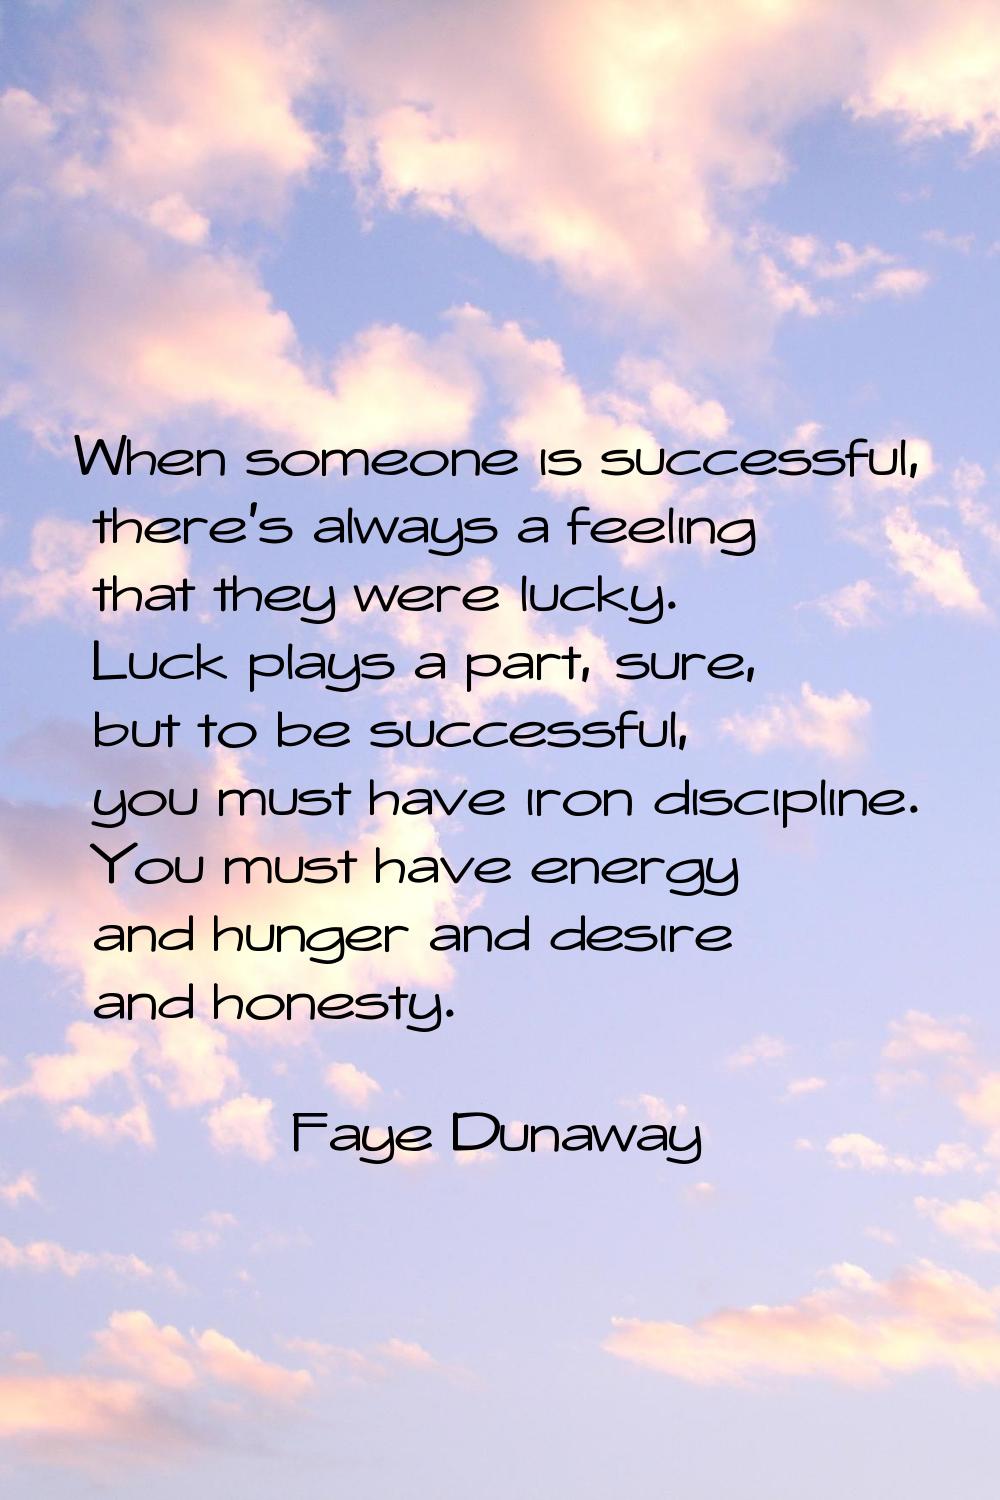 When someone is successful, there's always a feeling that they were lucky. Luck plays a part, sure,